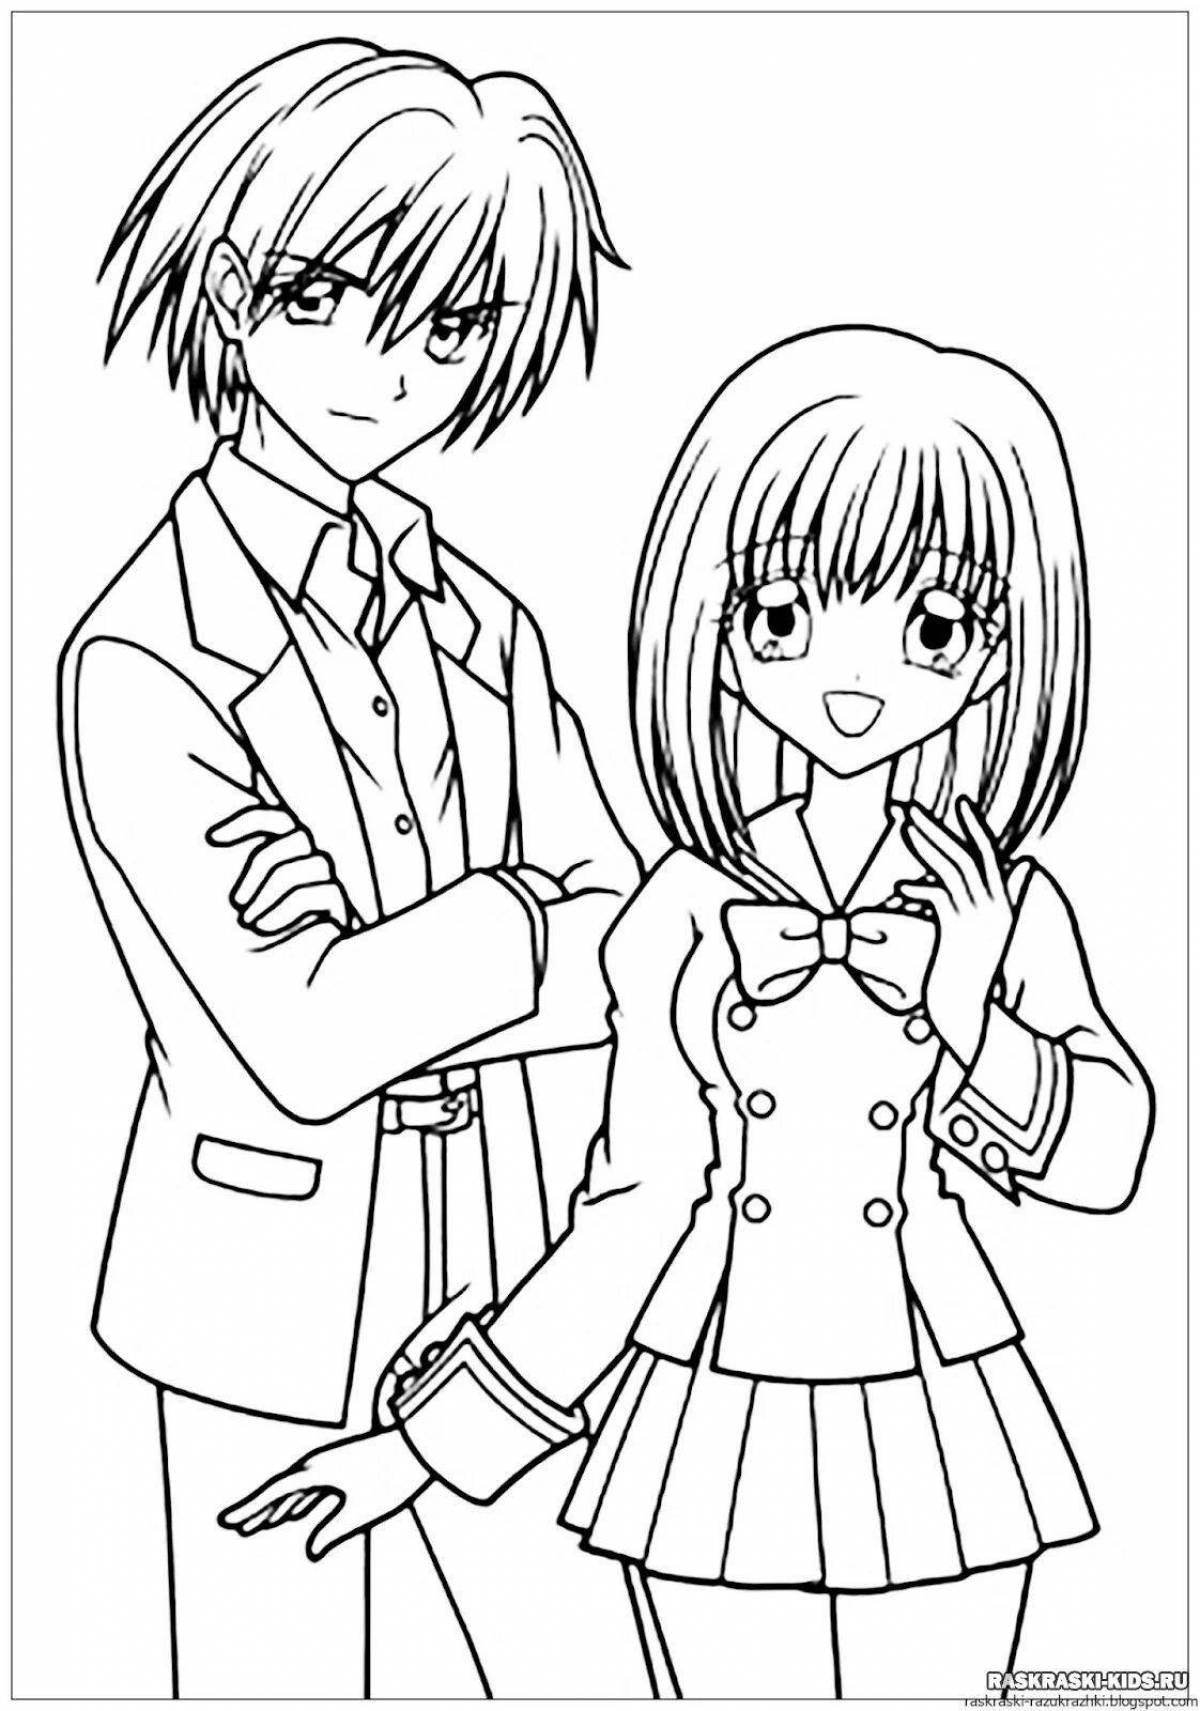 Amazing anime boys and girls coloring pages